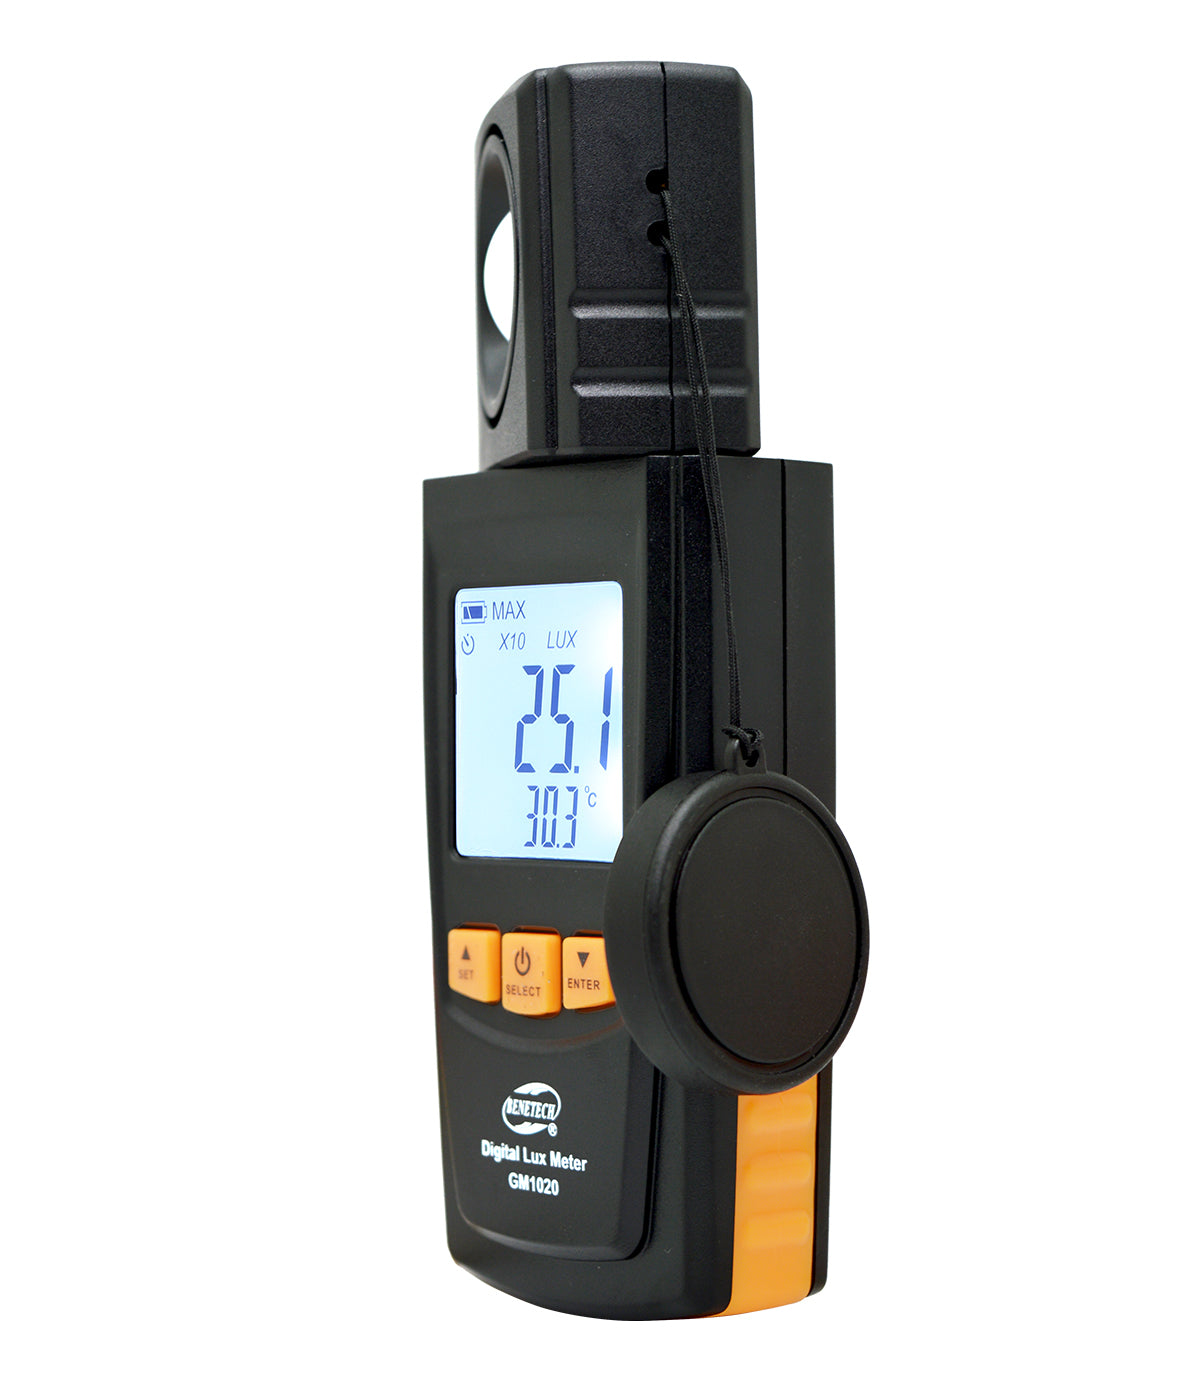 Benetech GM1020 Digital Lux Meter 0-200,000 Lux Illuminance with Backlight